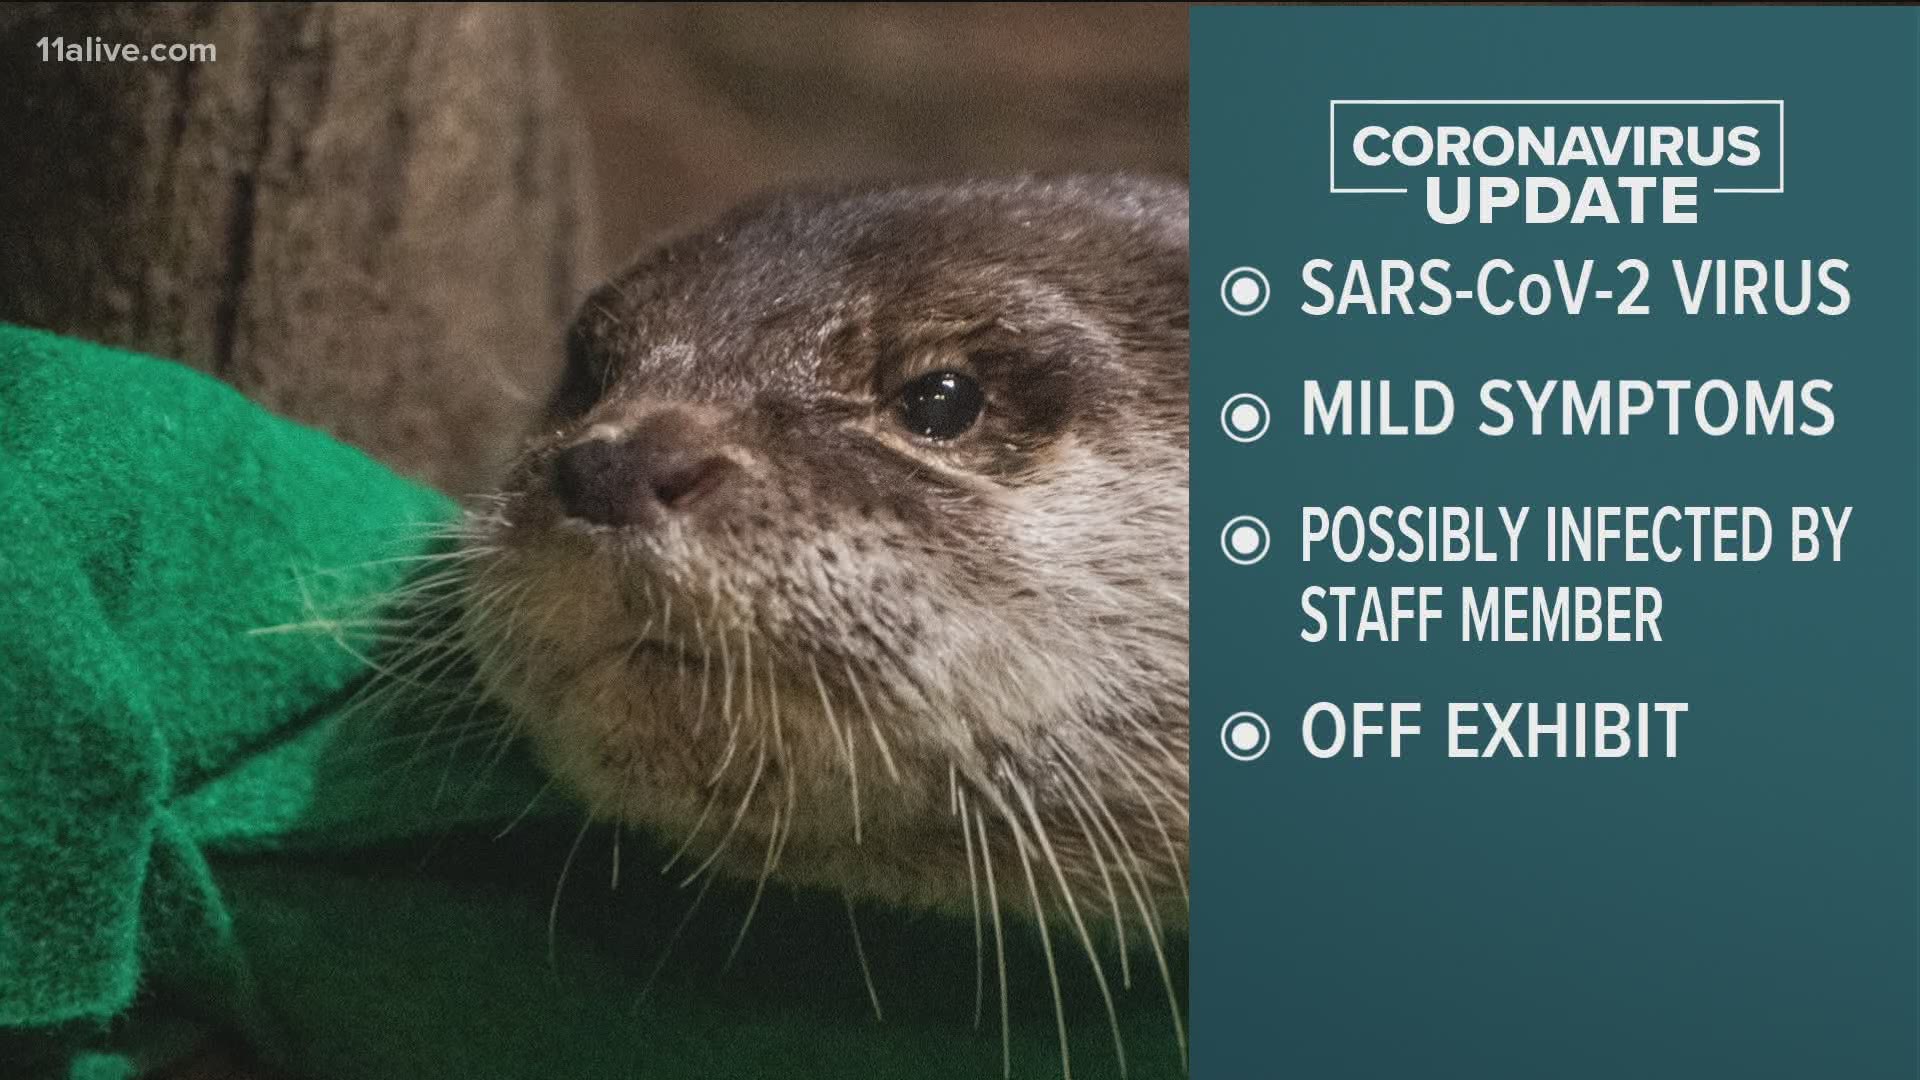 It is suspected that the otters may have acquired the infection from an asymptomatic staff member, the aquarium said.